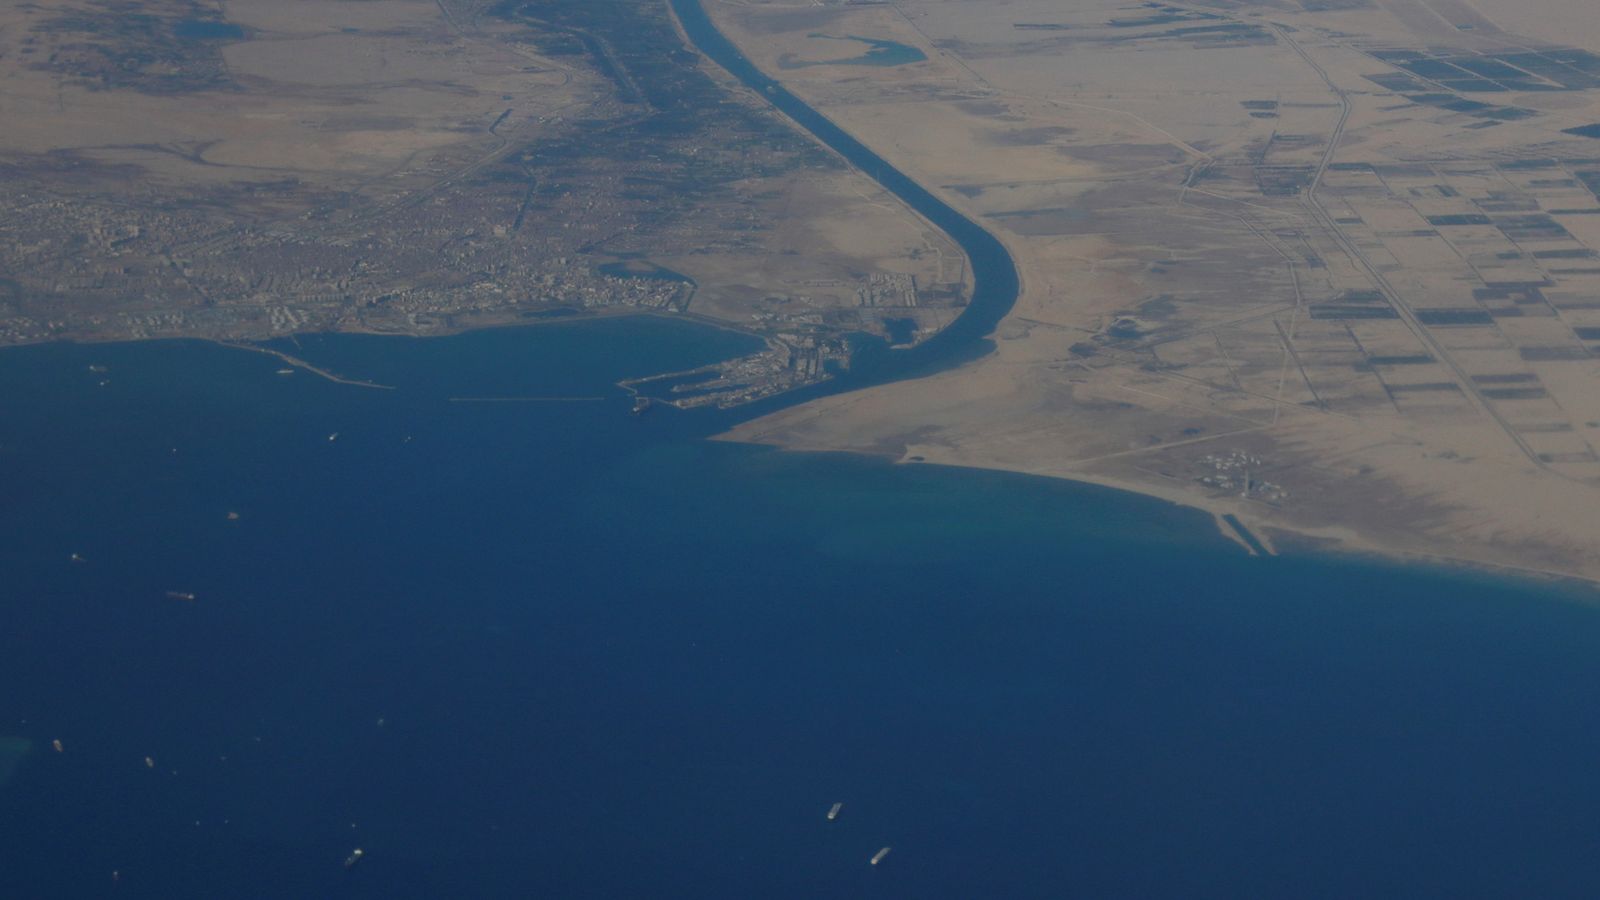 Tugs free ship grounded in Egypt's Suez Canal - one of world's busiest shipping routes